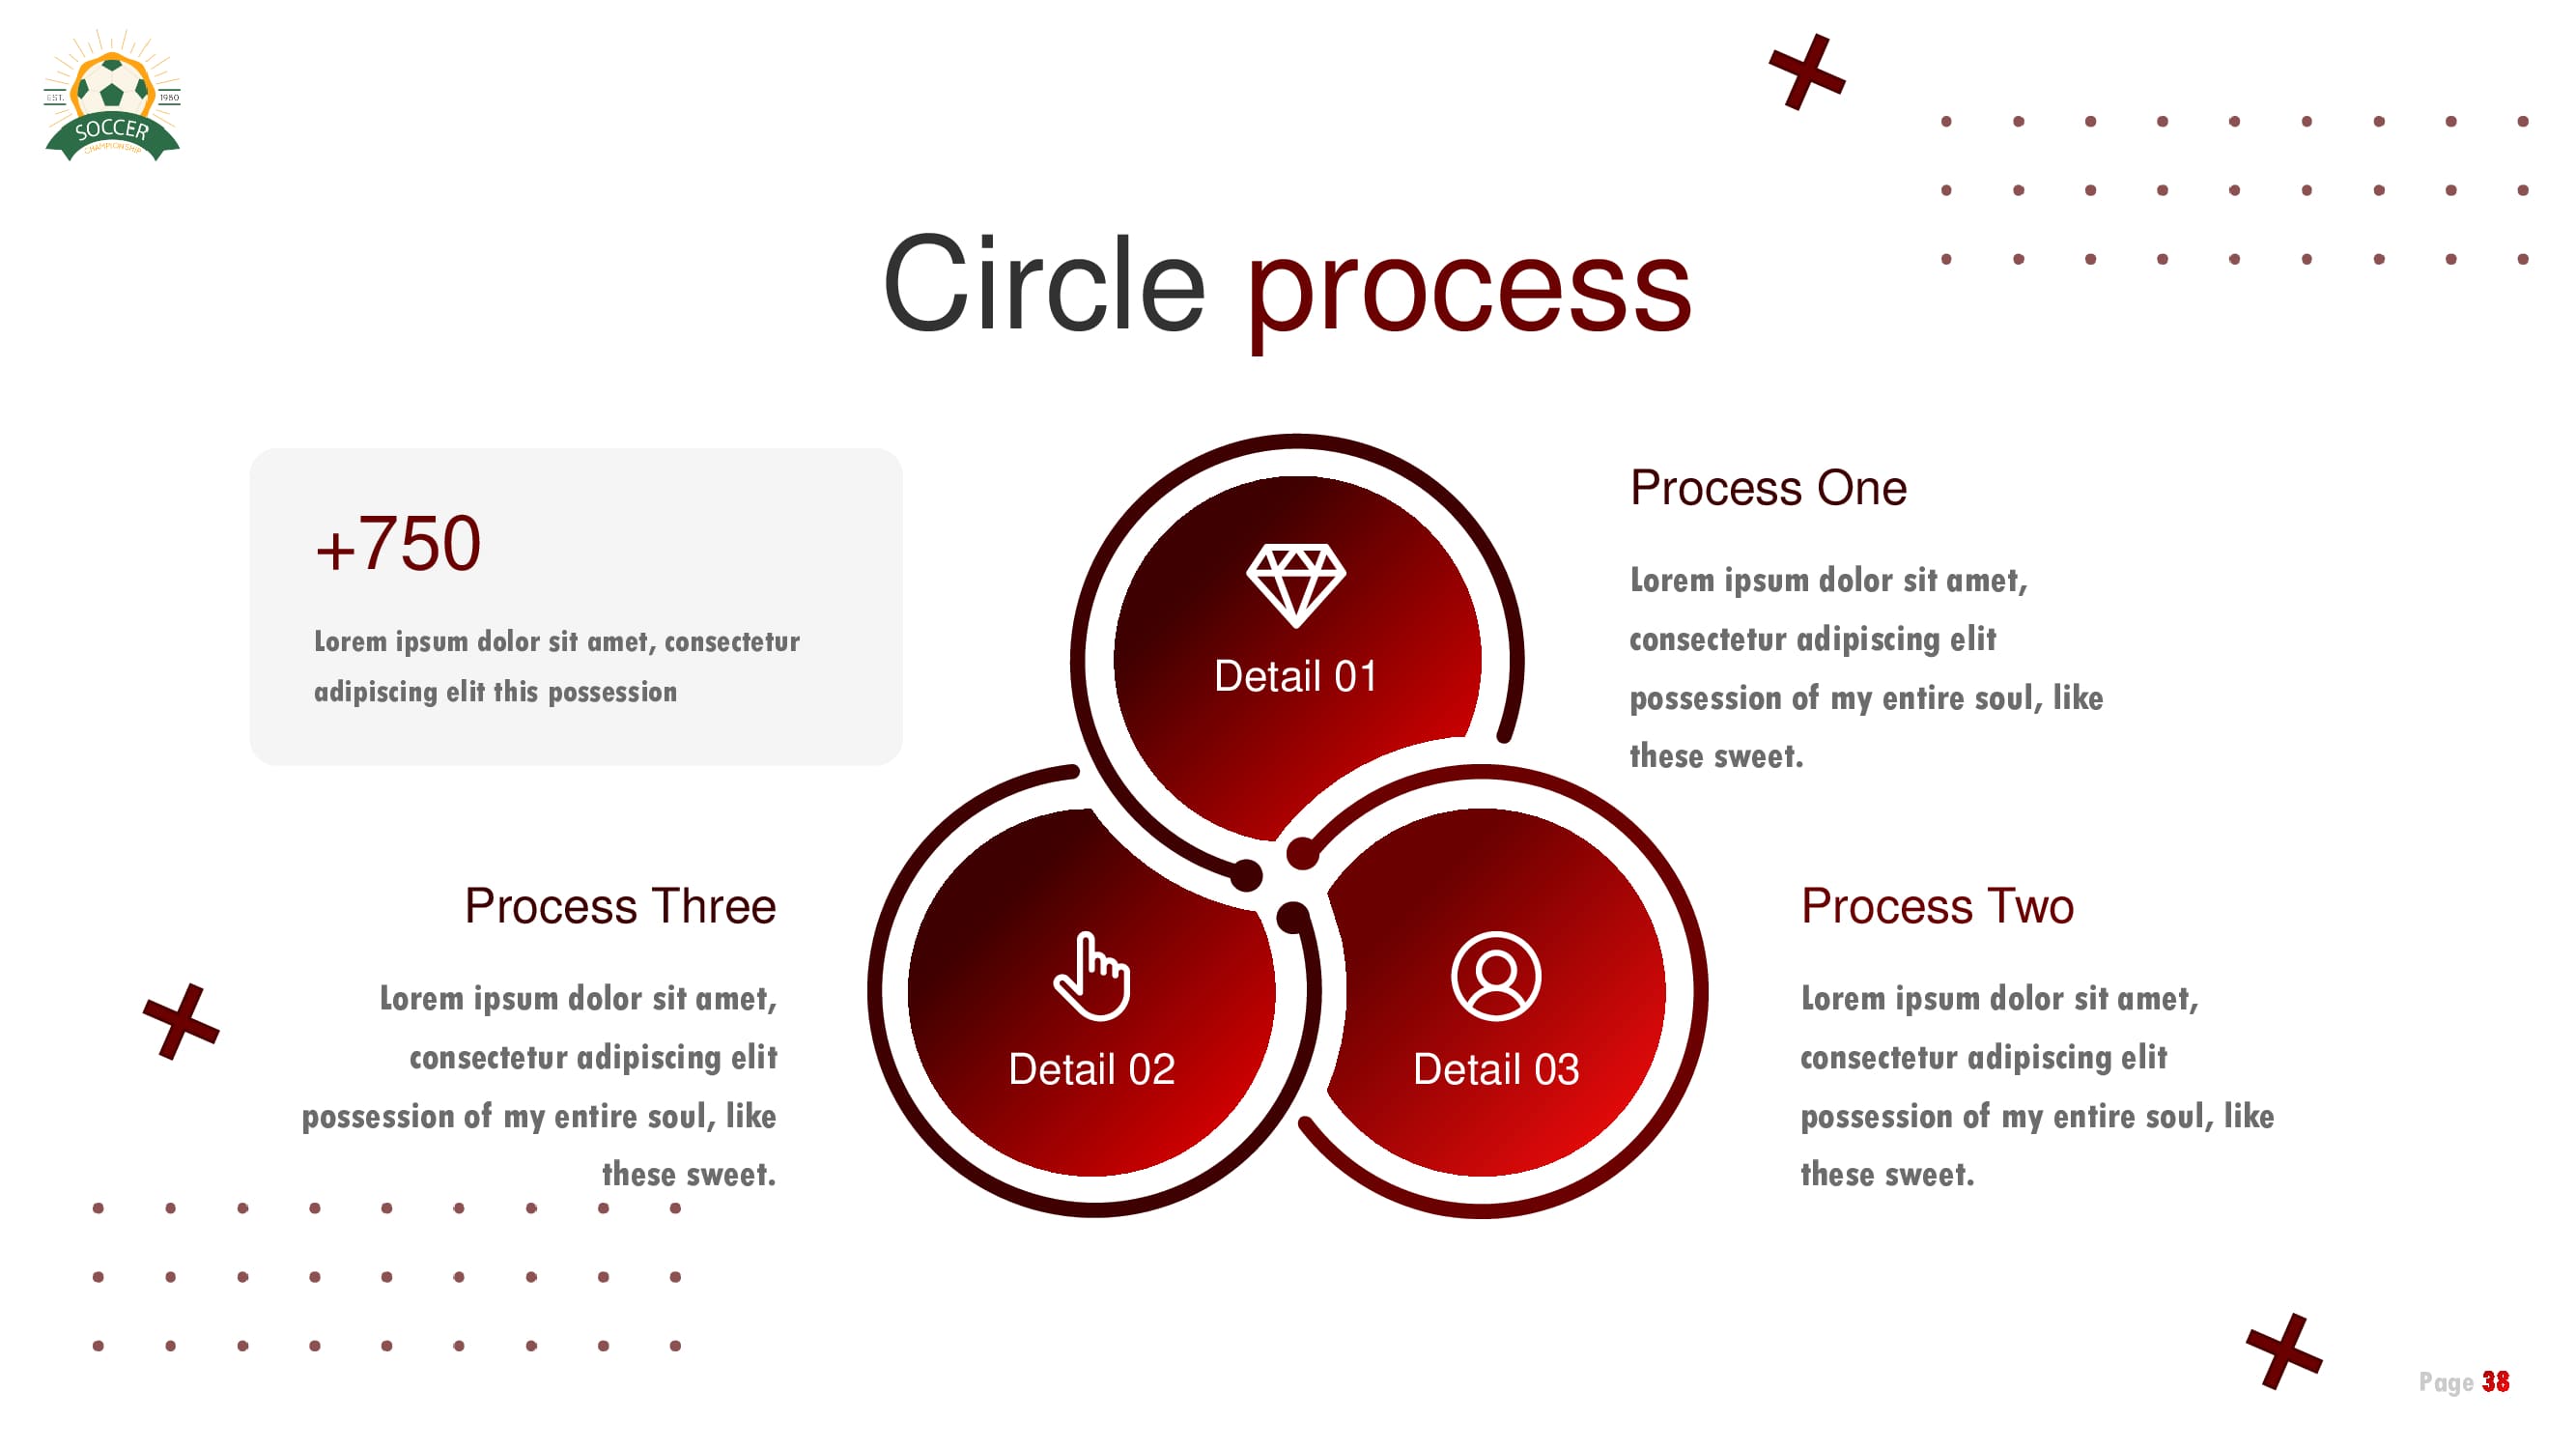 A comfortable slide for 3 circle processes and descriptions for them.